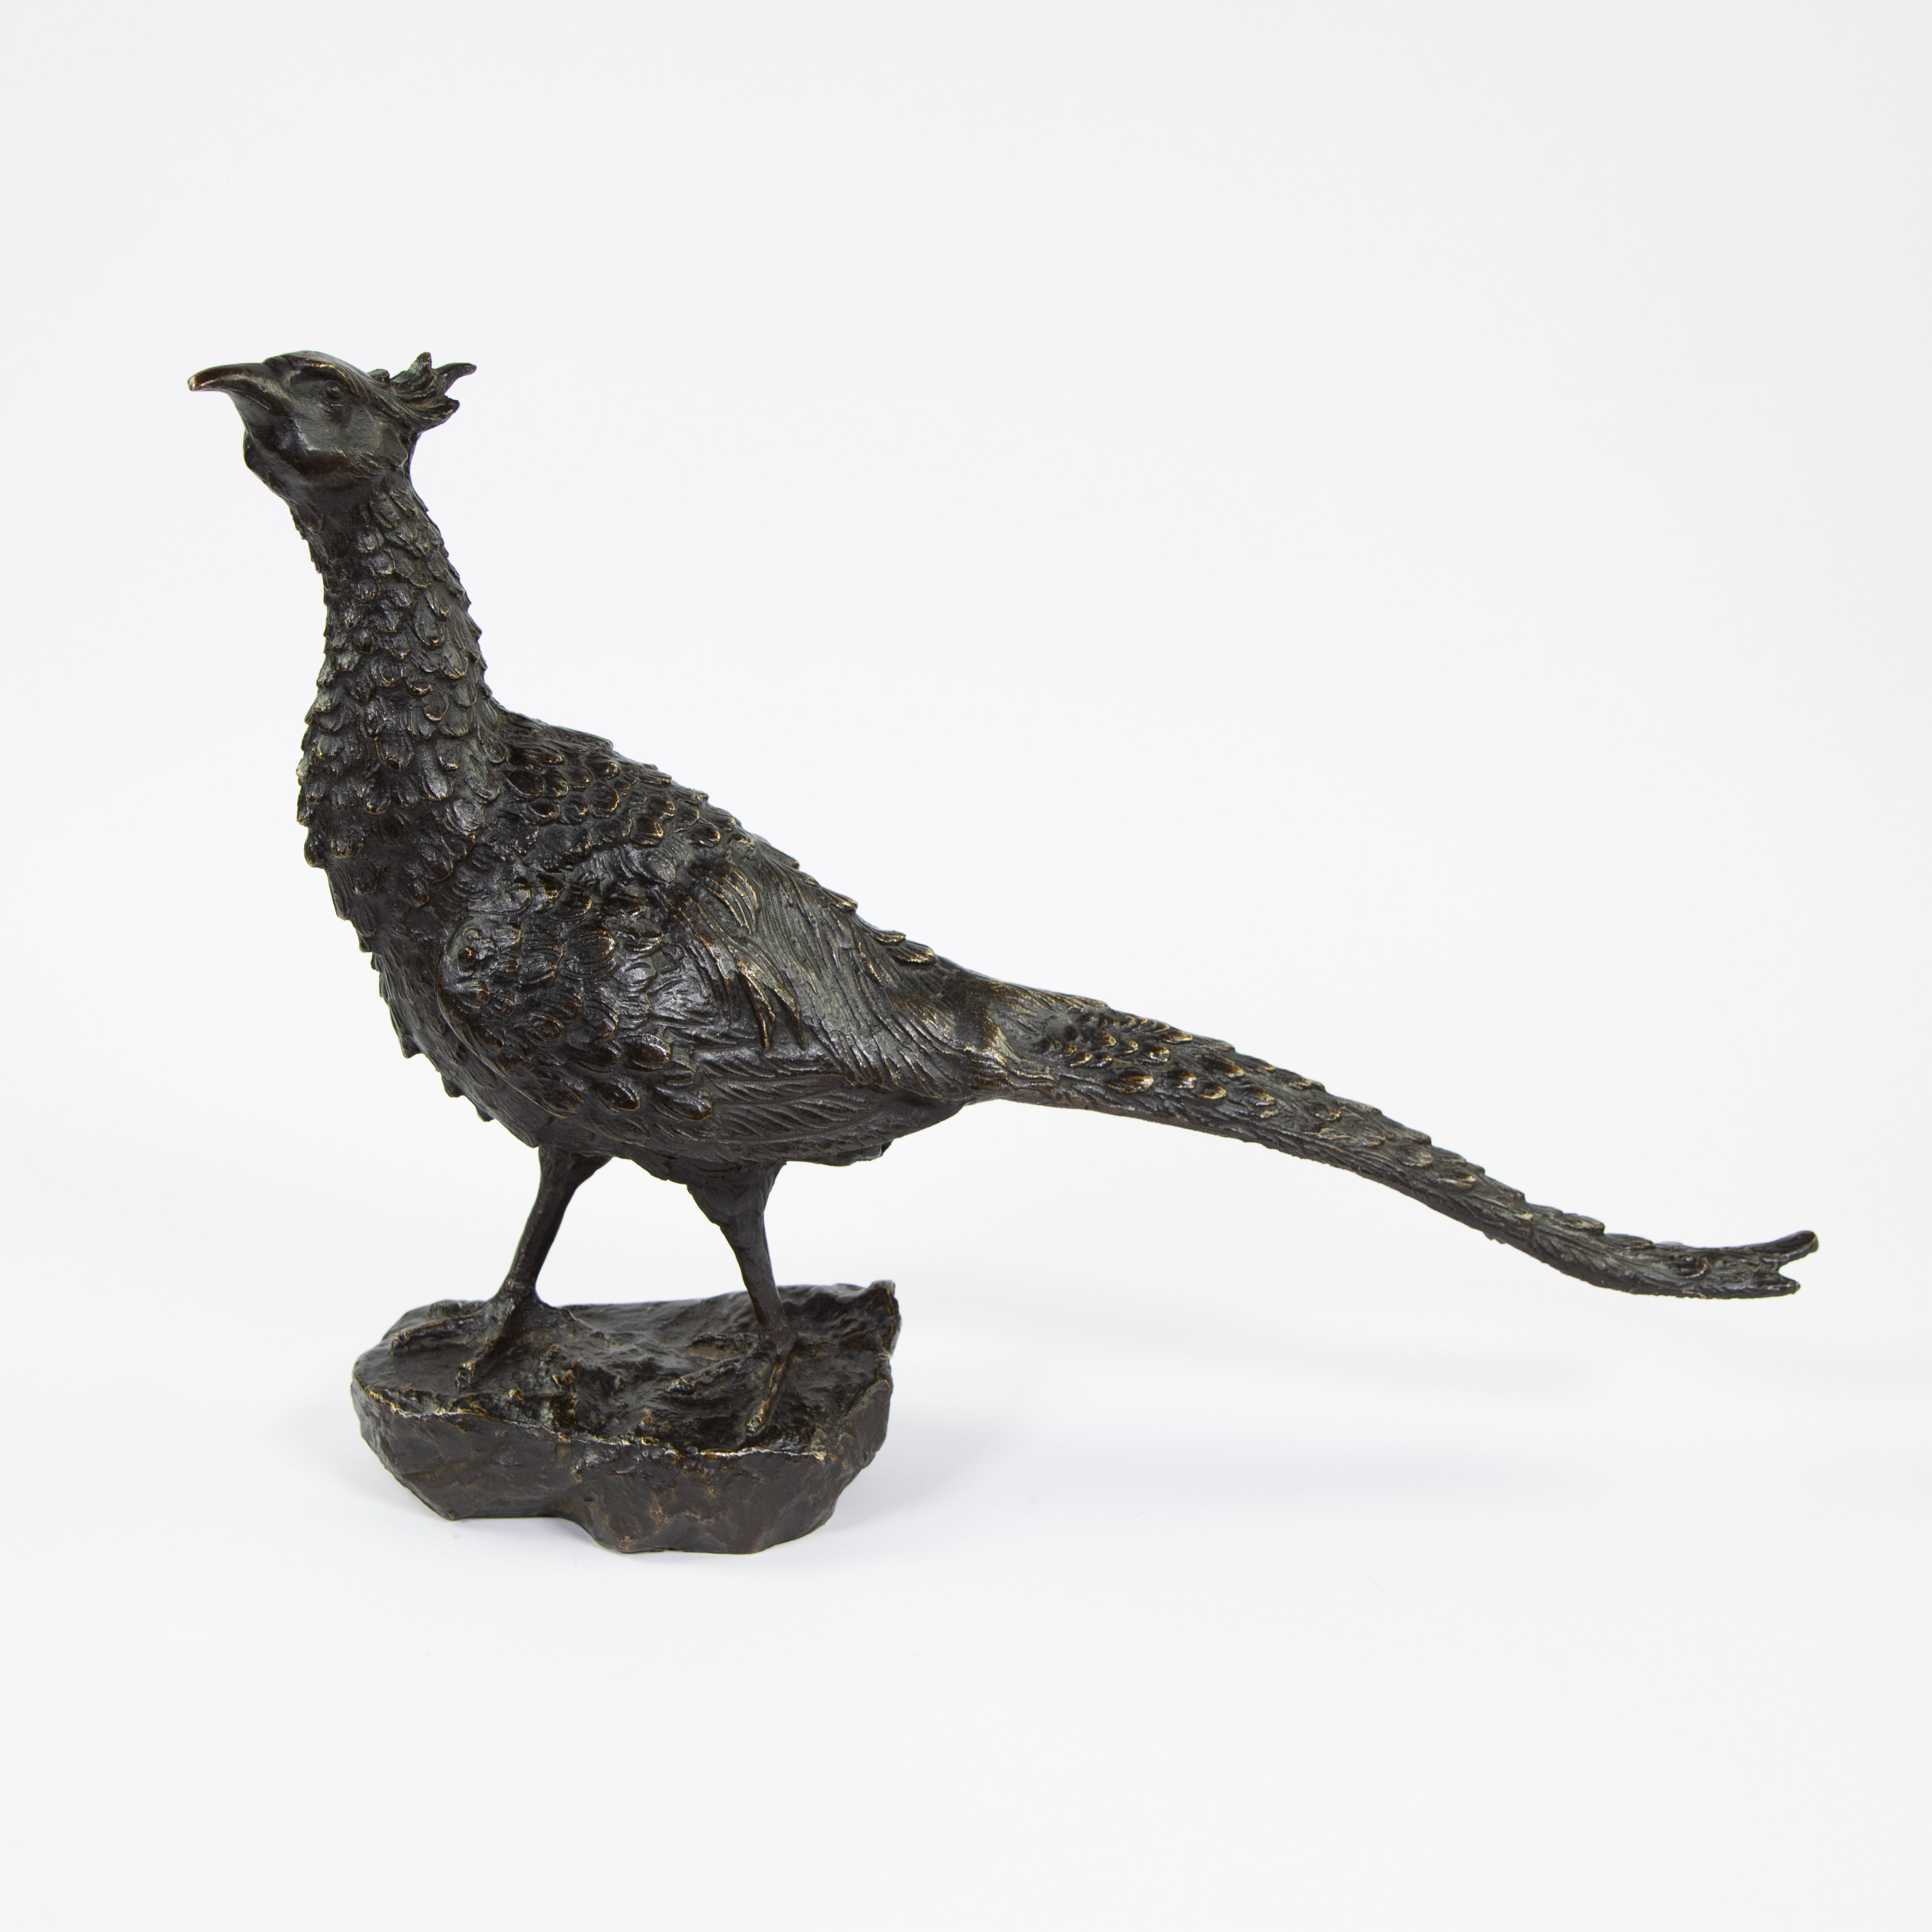 Antonio AMORGASTI (1880-1942), patinated and partly gilt bronze pheasant, signed and dated 1920. - Image 2 of 6